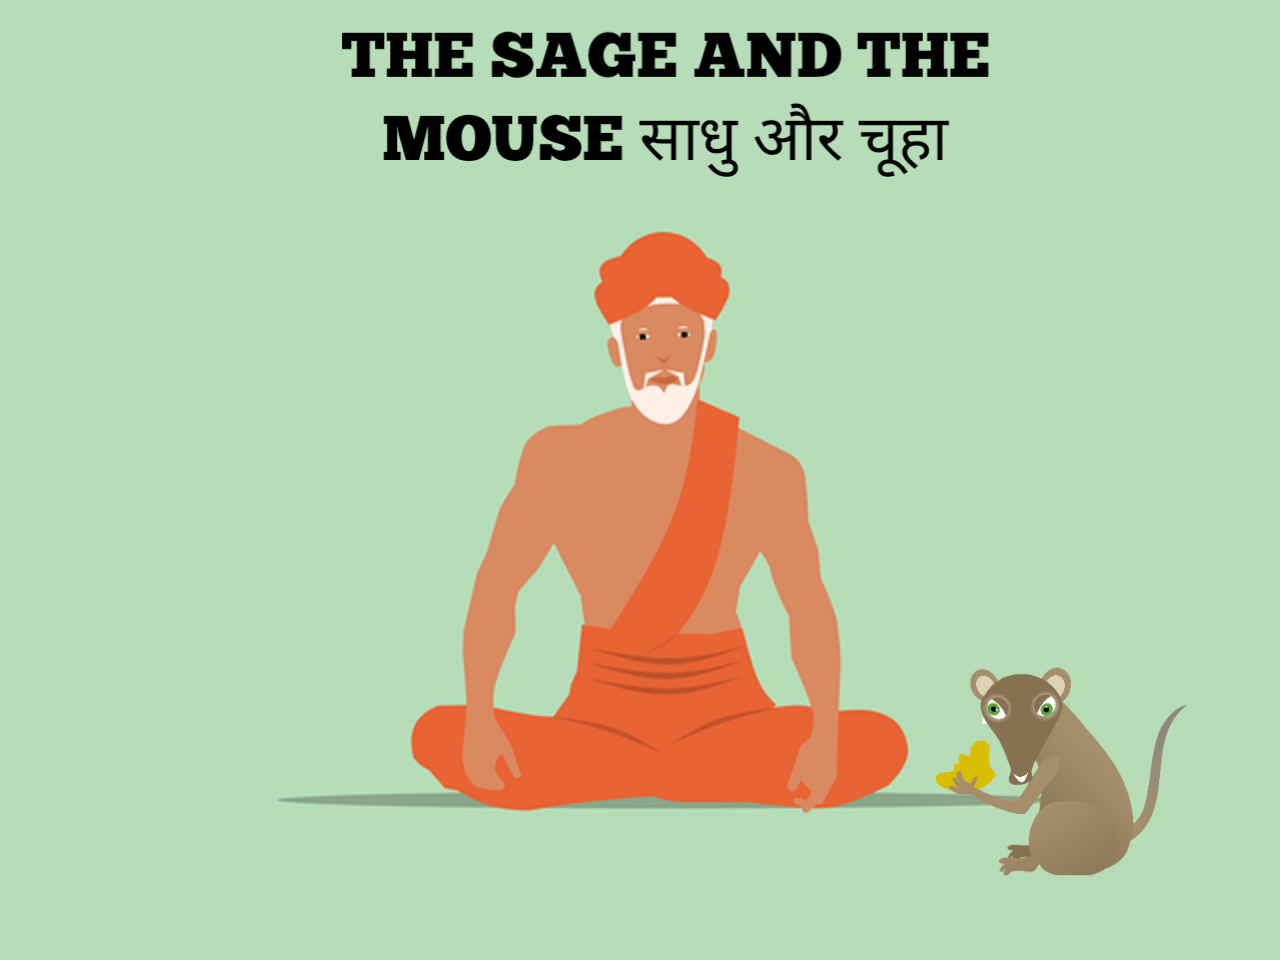 THE SAGE AND THE MOUSE